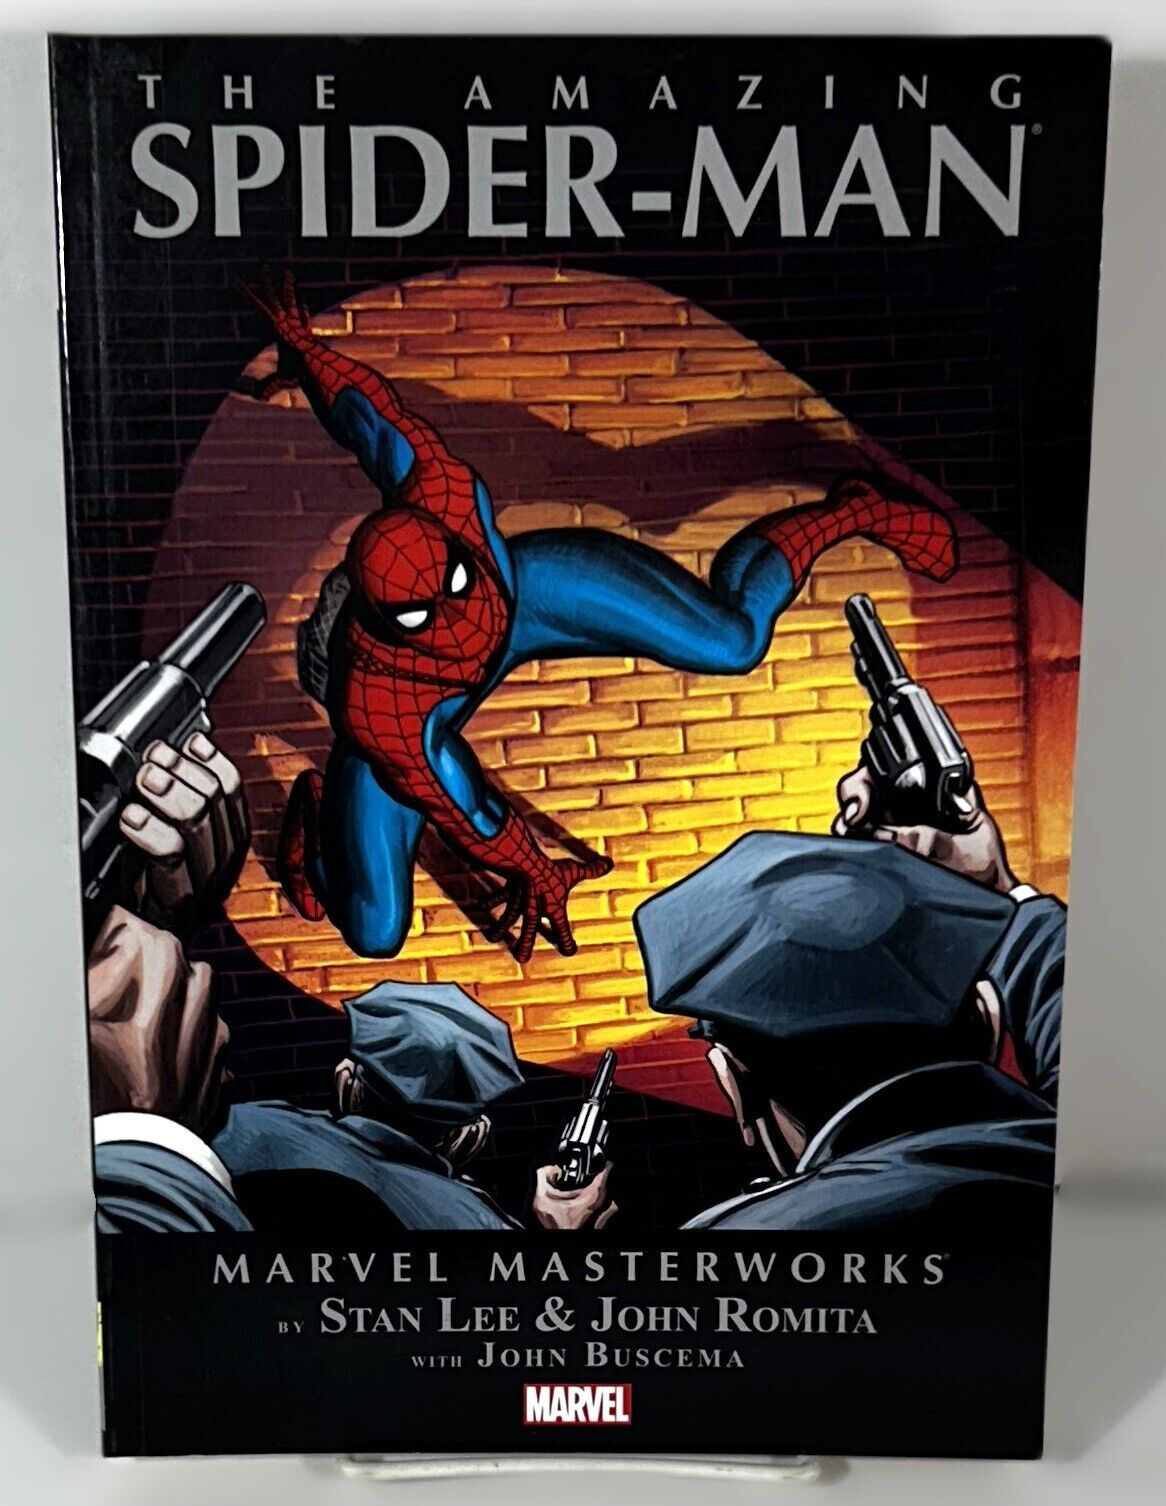 Marvel Masterworks: The Amazing Spider-Man Vol 8 by Stan Lee 2014 Softcover